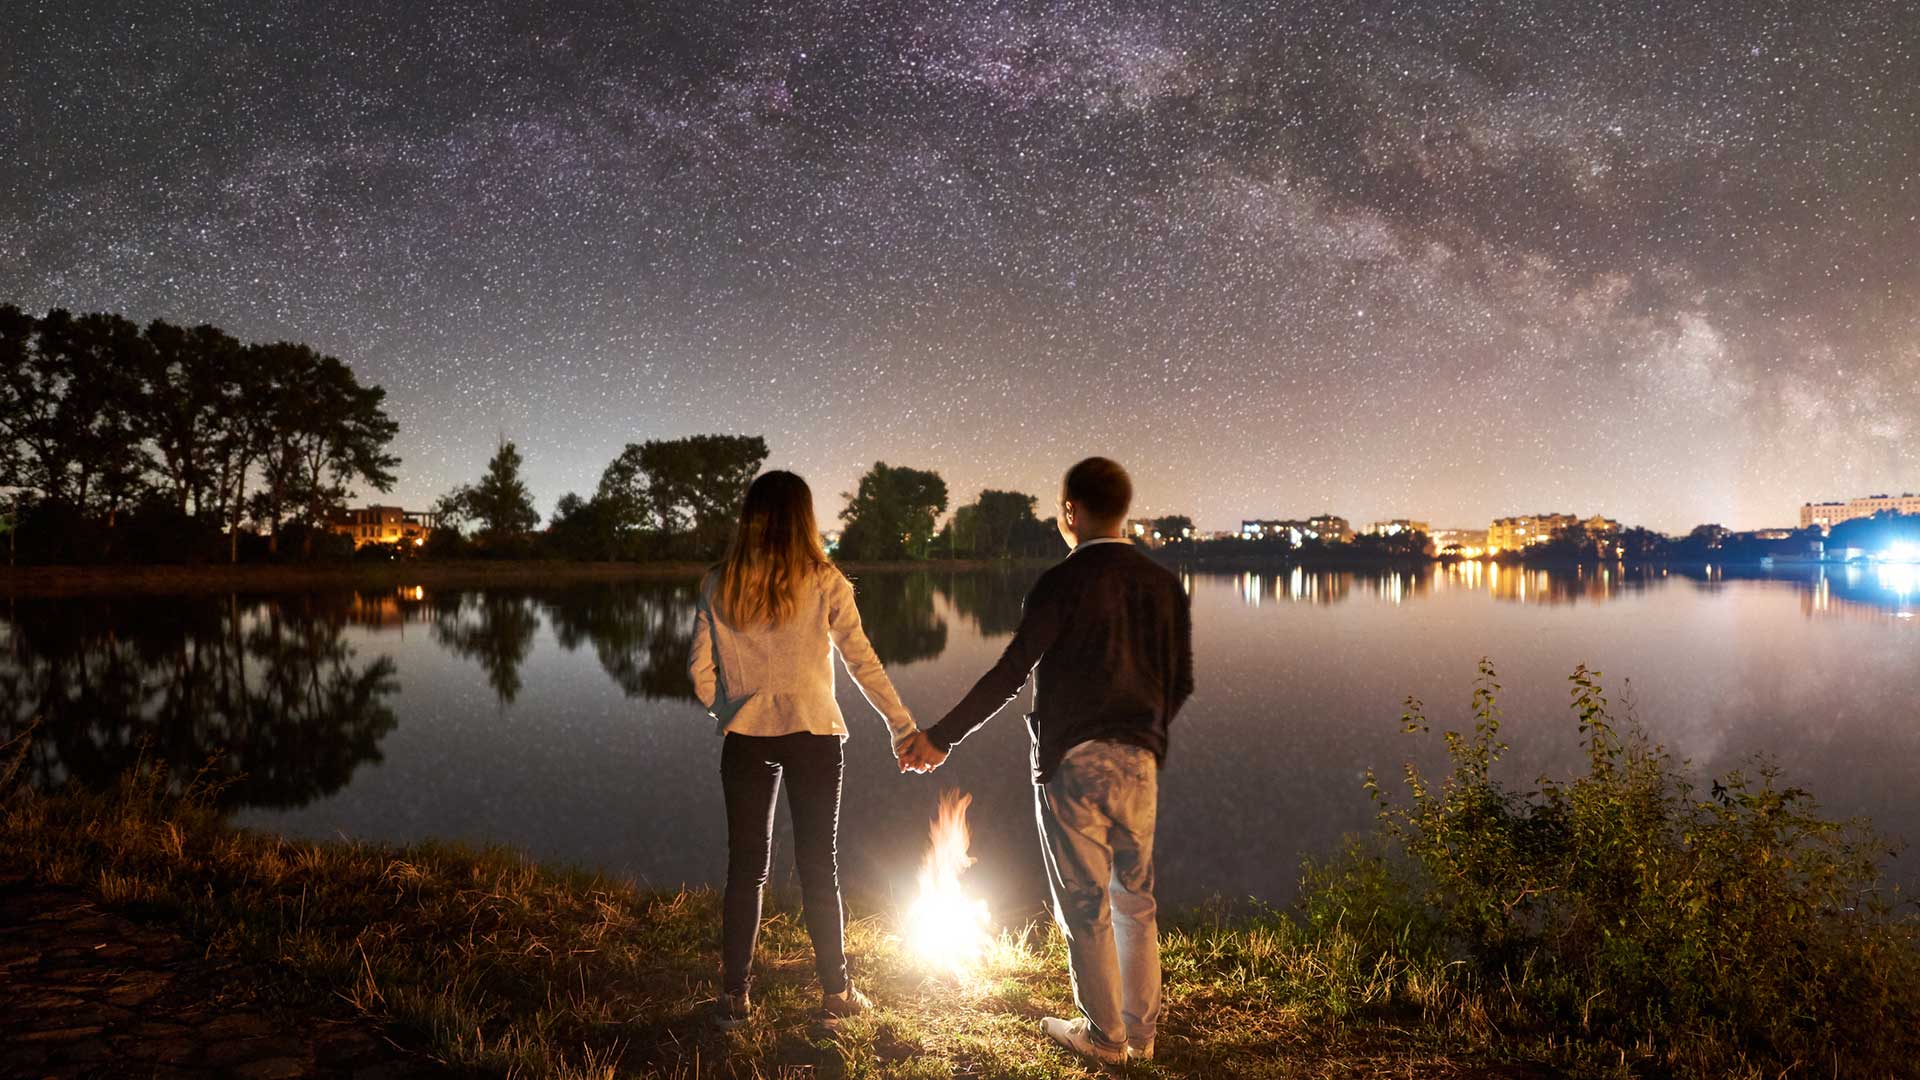 The men are holding hands in the lake under the night sky